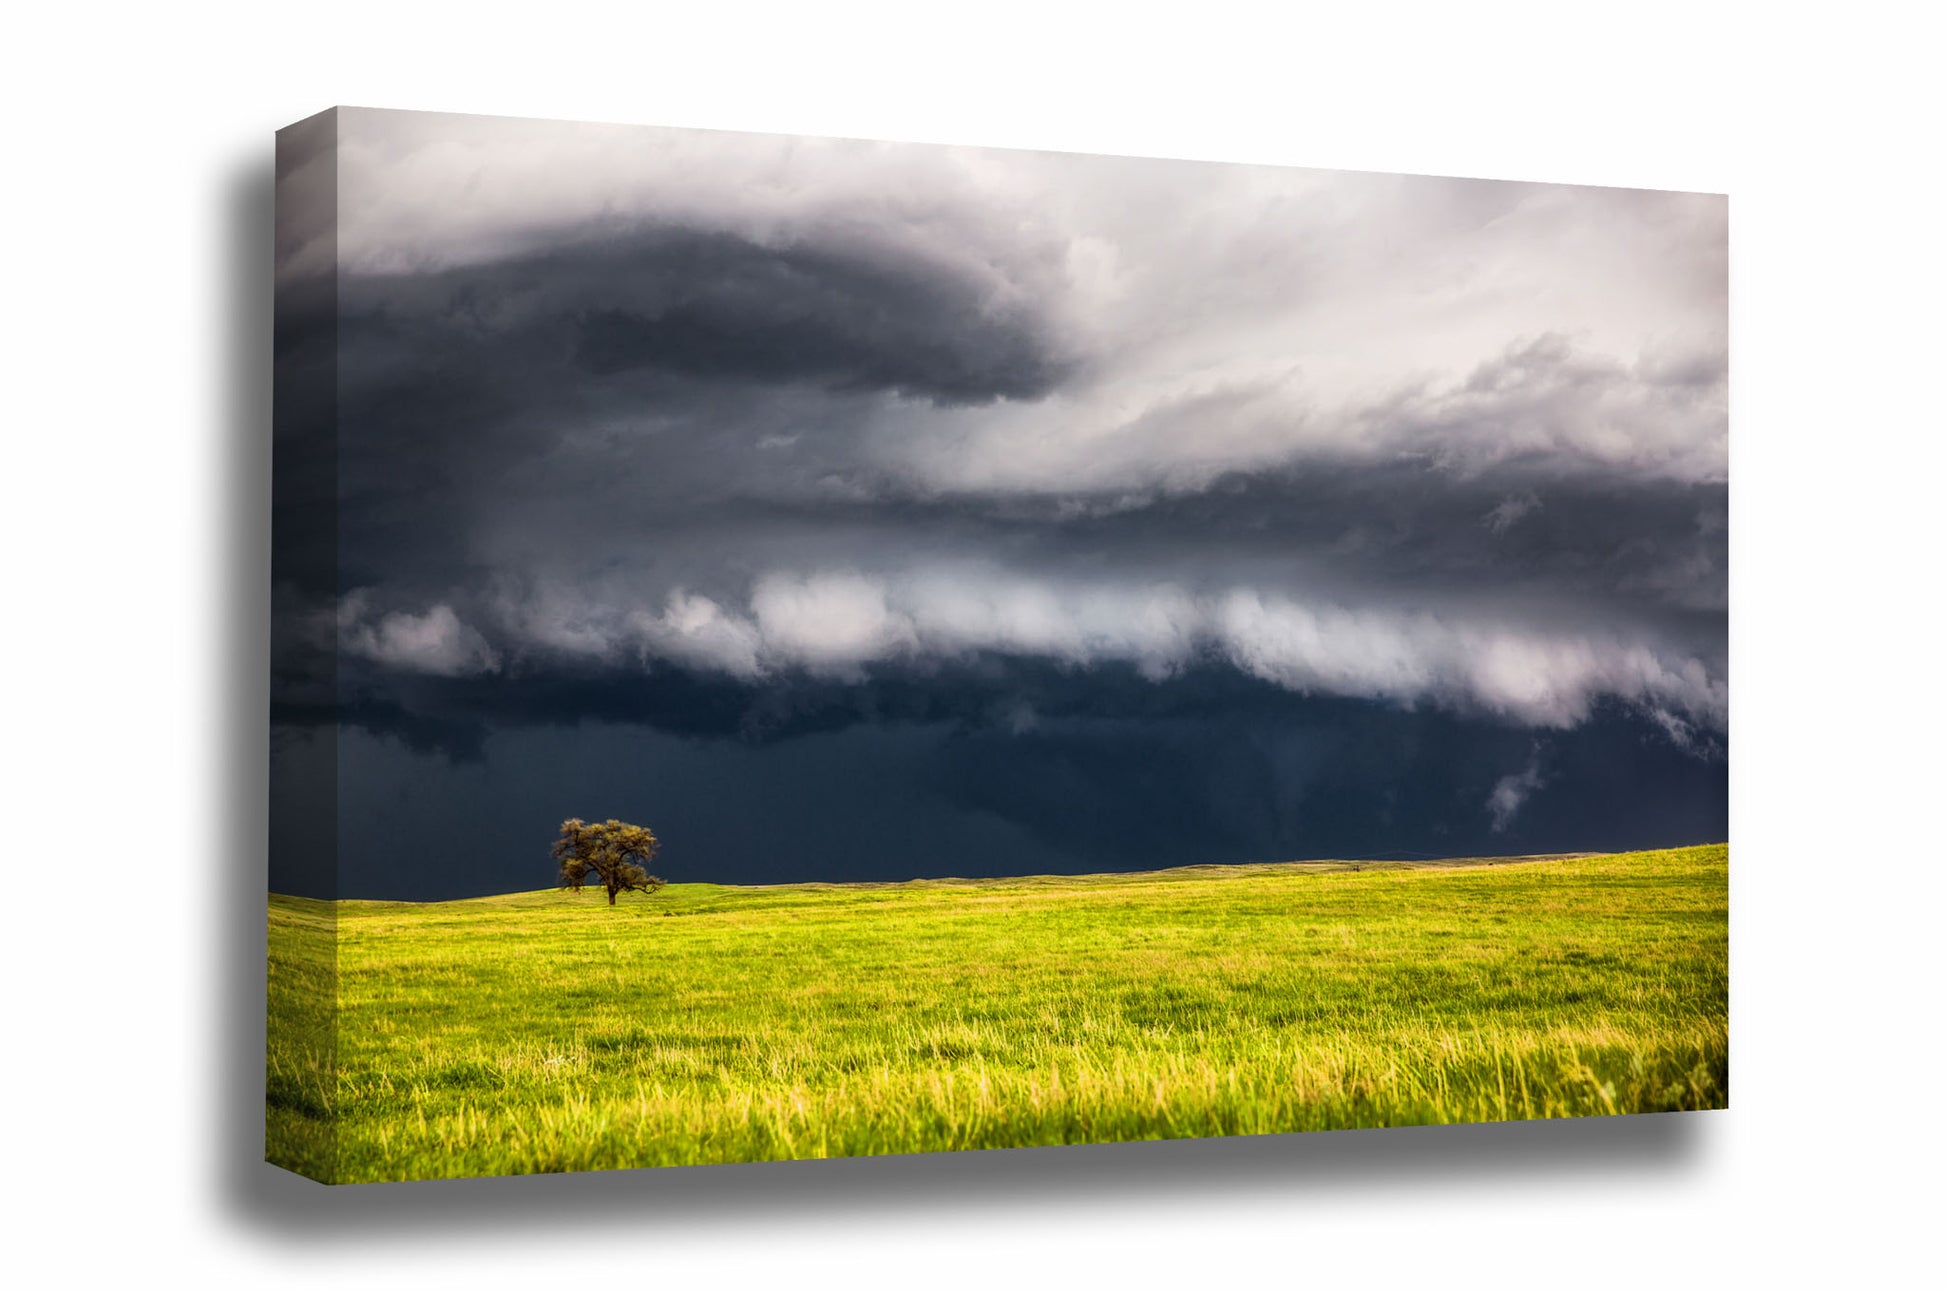 Storm canvas wall art of a supercell thunderstorm passing behind a lone tree on a spring day on the Nebraska prairie by Sean Ramsey of Southern Plains Photography.